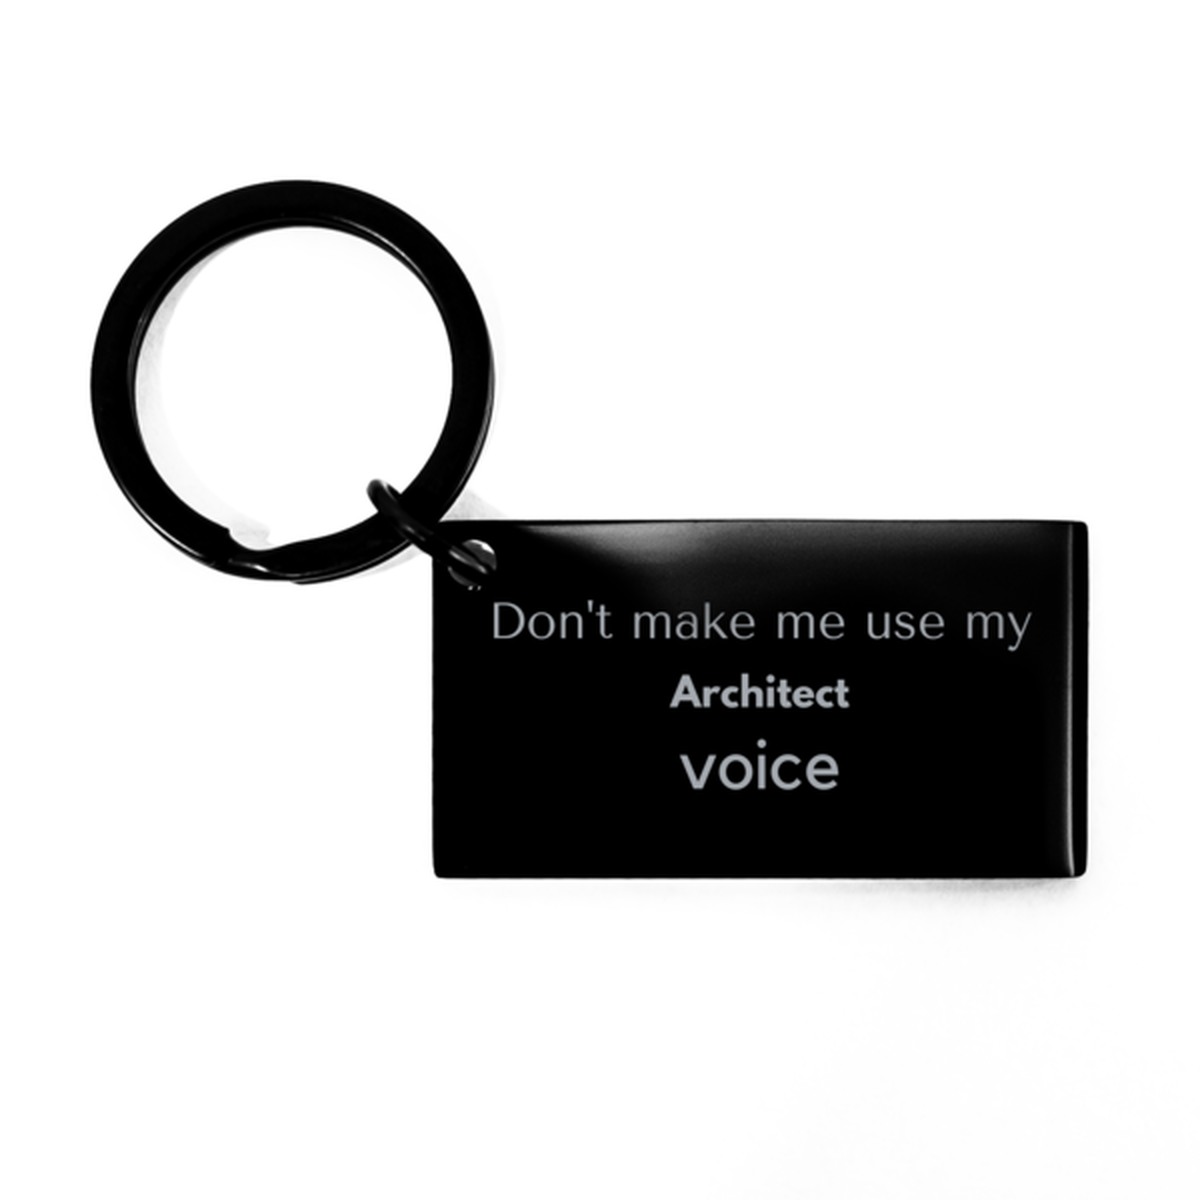 Don't make me use my Architect voice, Sarcasm Architect Gifts, Christmas Architect Keychain Birthday Unique Gifts For Architect Coworkers, Men, Women, Colleague, Friends